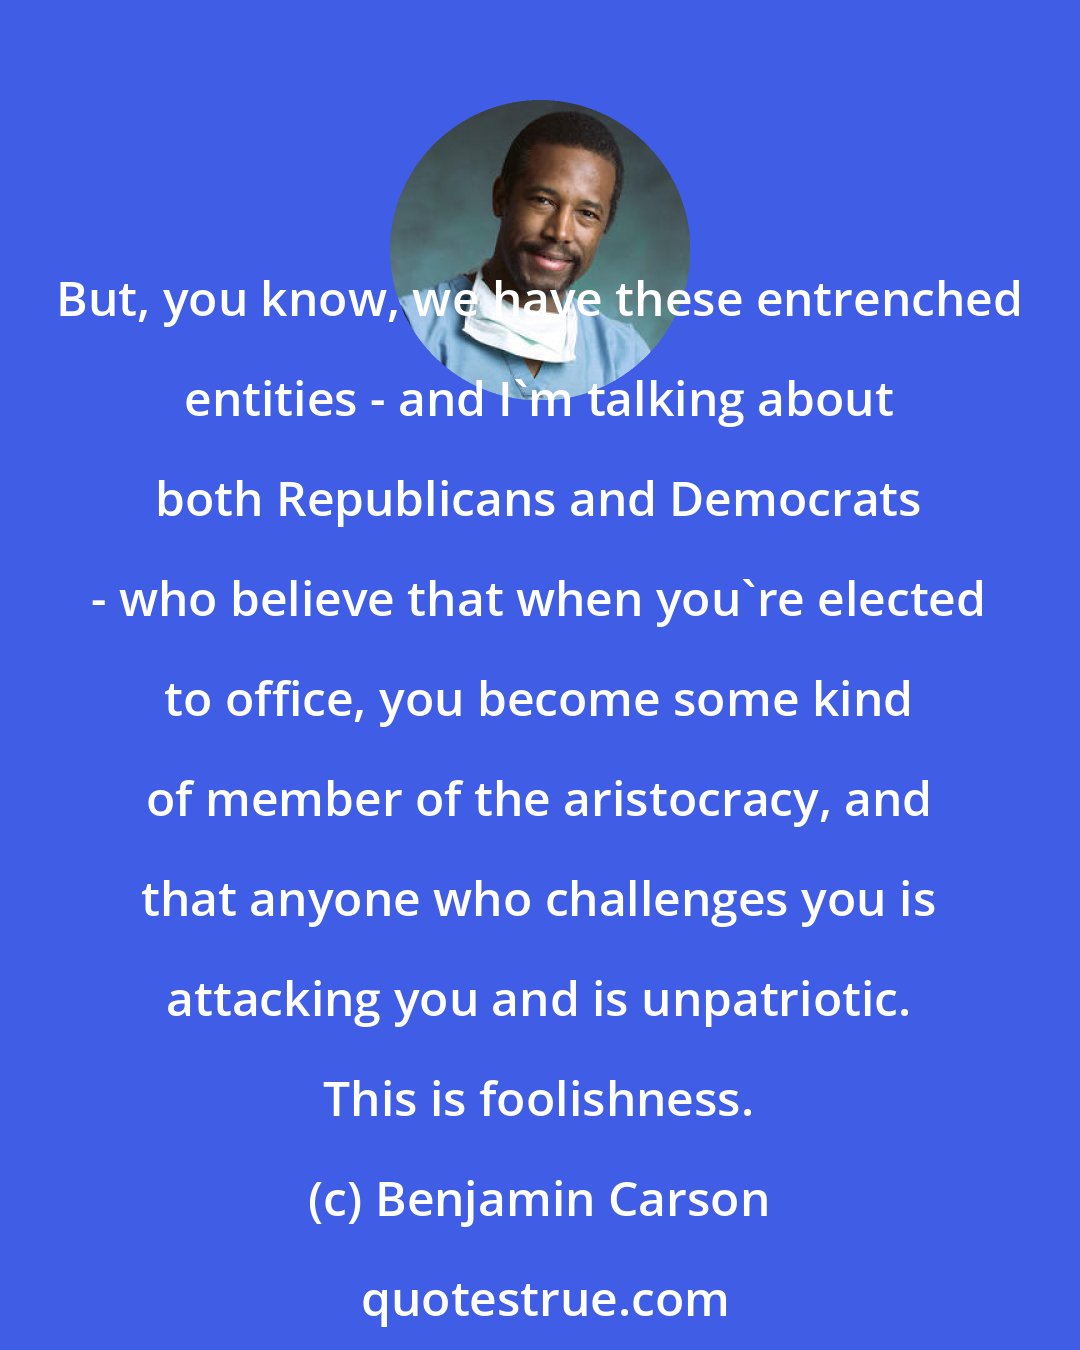 Benjamin Carson: But, you know, we have these entrenched entities - and I'm talking about both Republicans and Democrats - who believe that when you're elected to office, you become some kind of member of the aristocracy, and that anyone who challenges you is attacking you and is unpatriotic. This is foolishness.